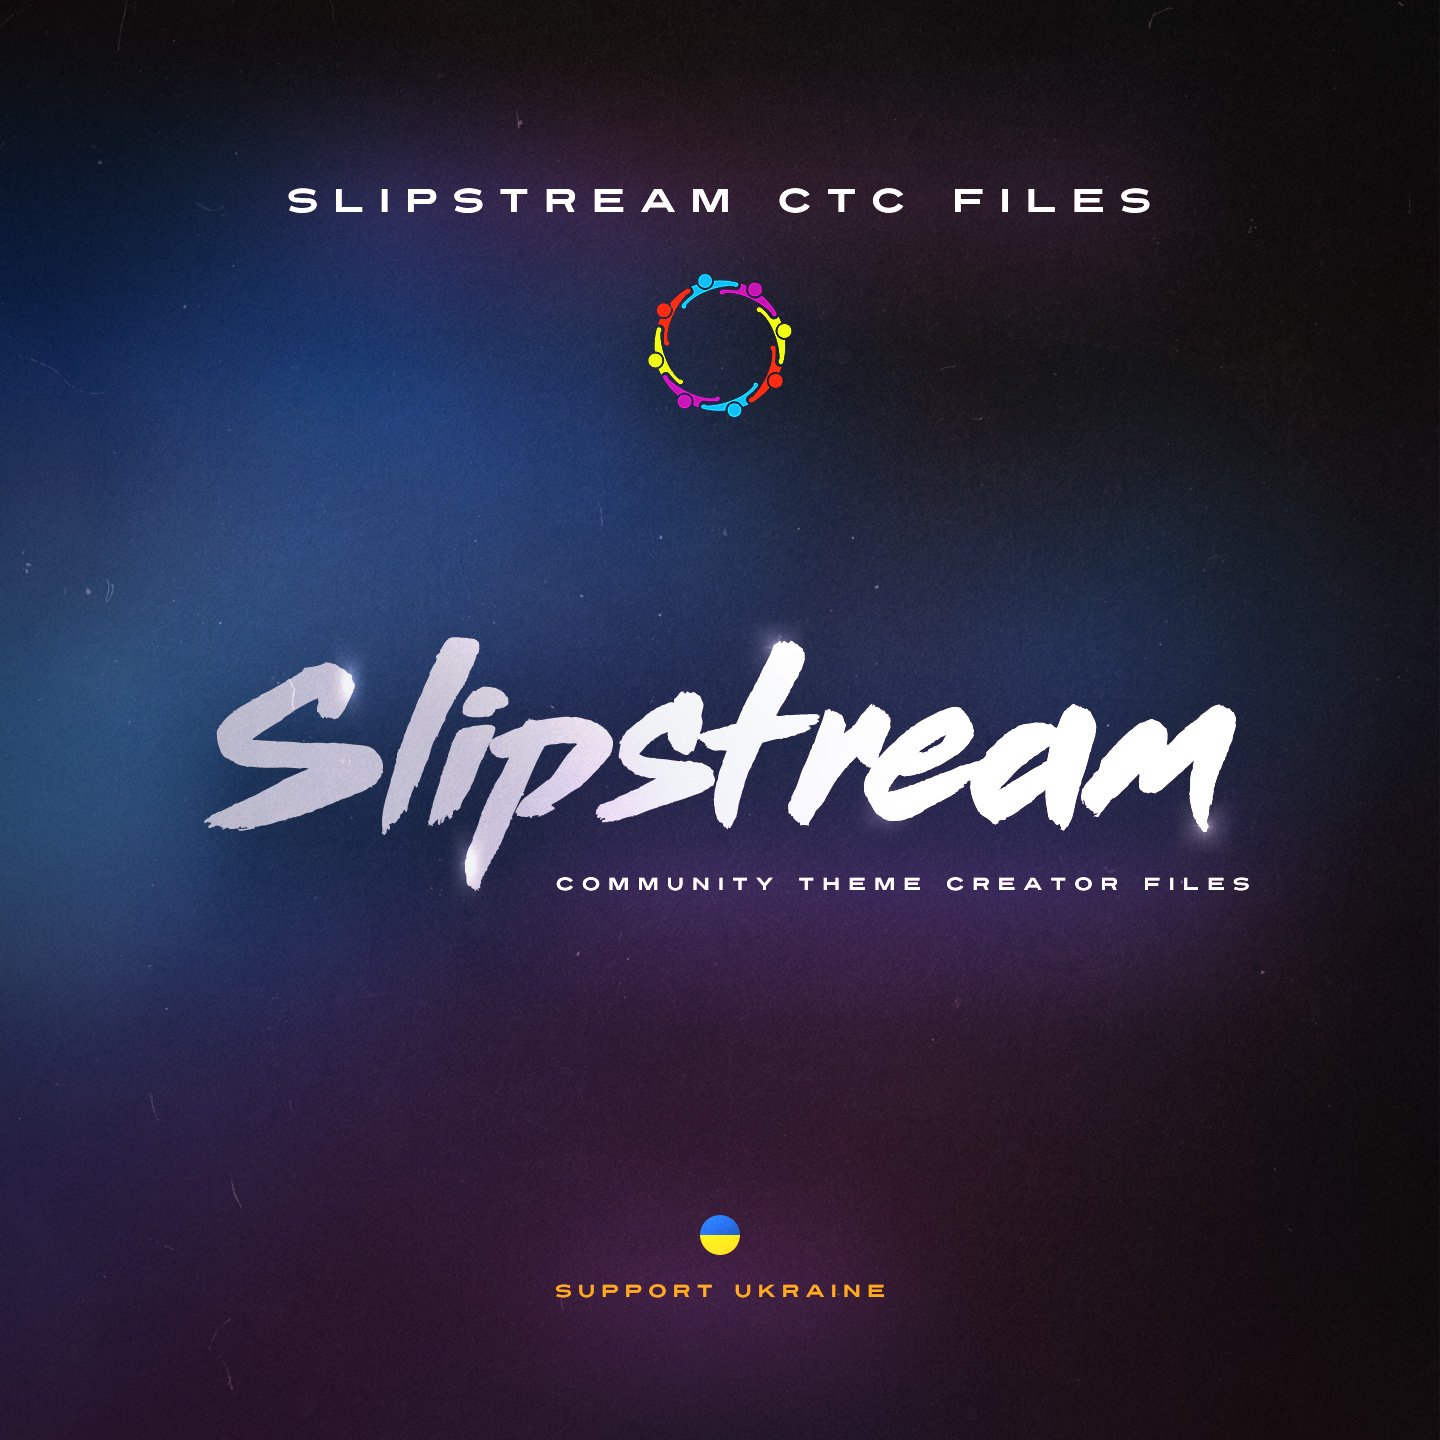 More information about "Slipstream CTC-files"